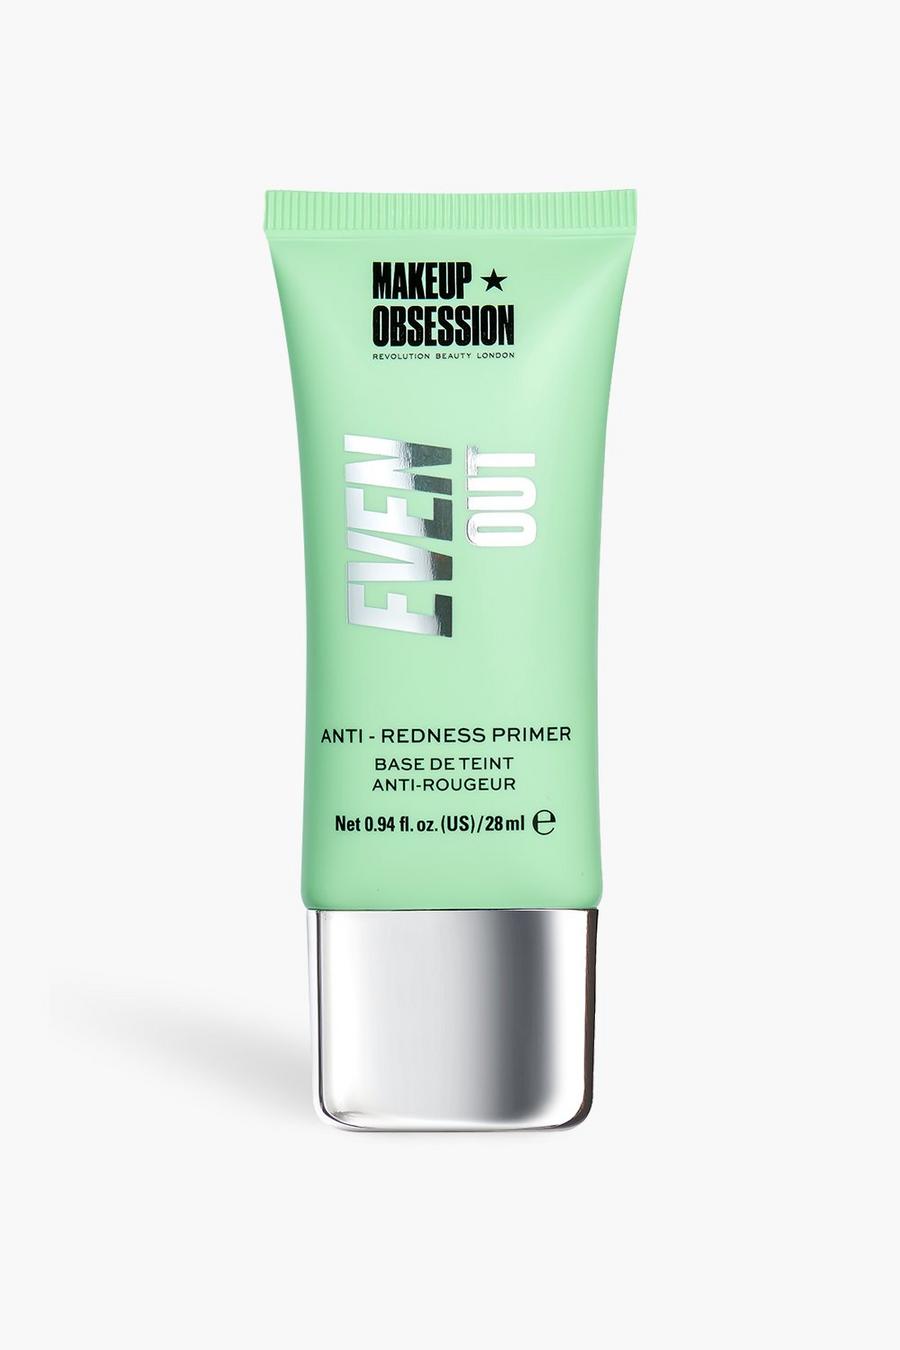 Multi Makeup Obsession Even Out Primer 28ml image number 1